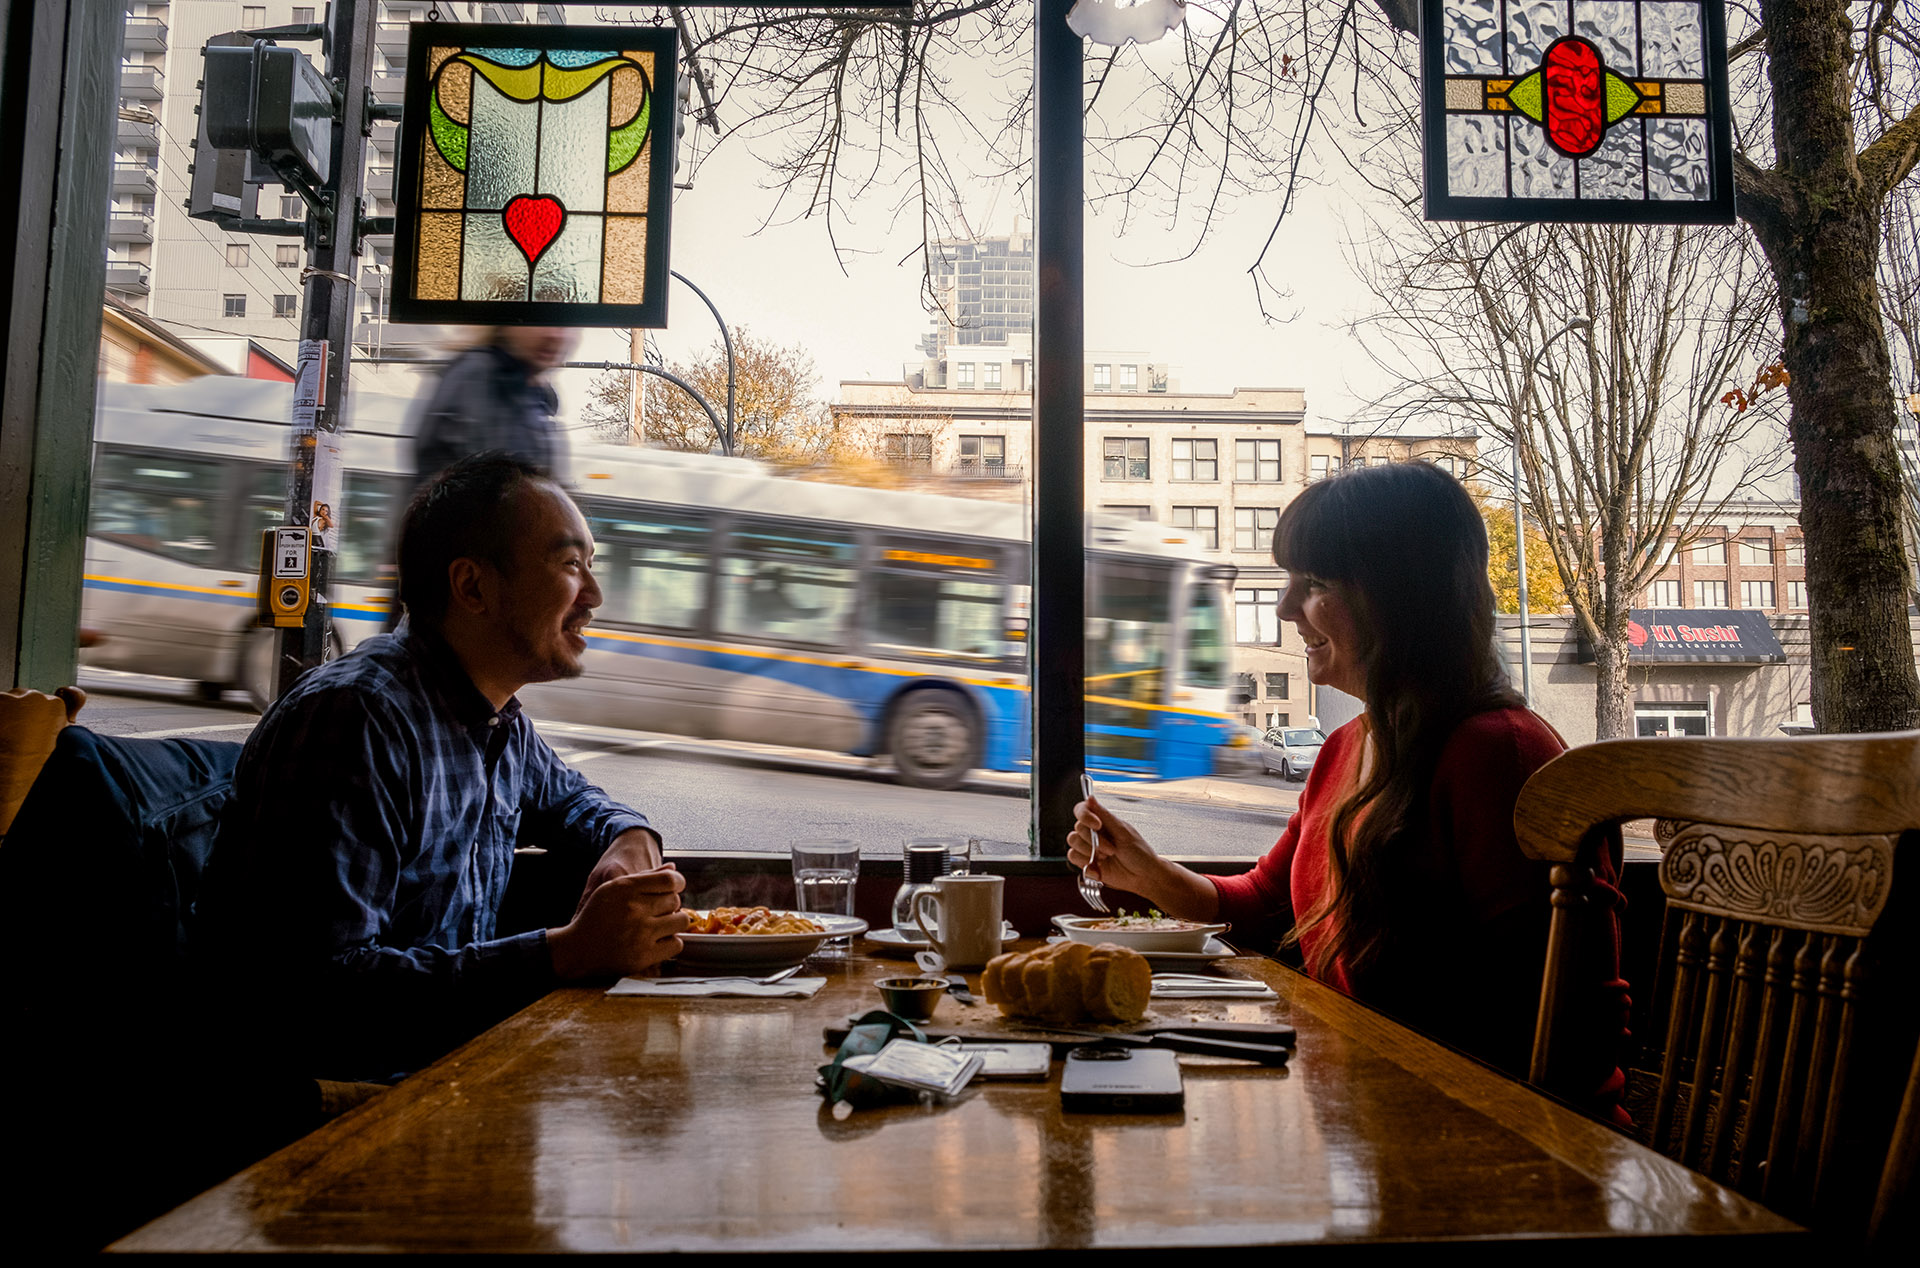 Two people dining at a restaurant as a bus passes by outside